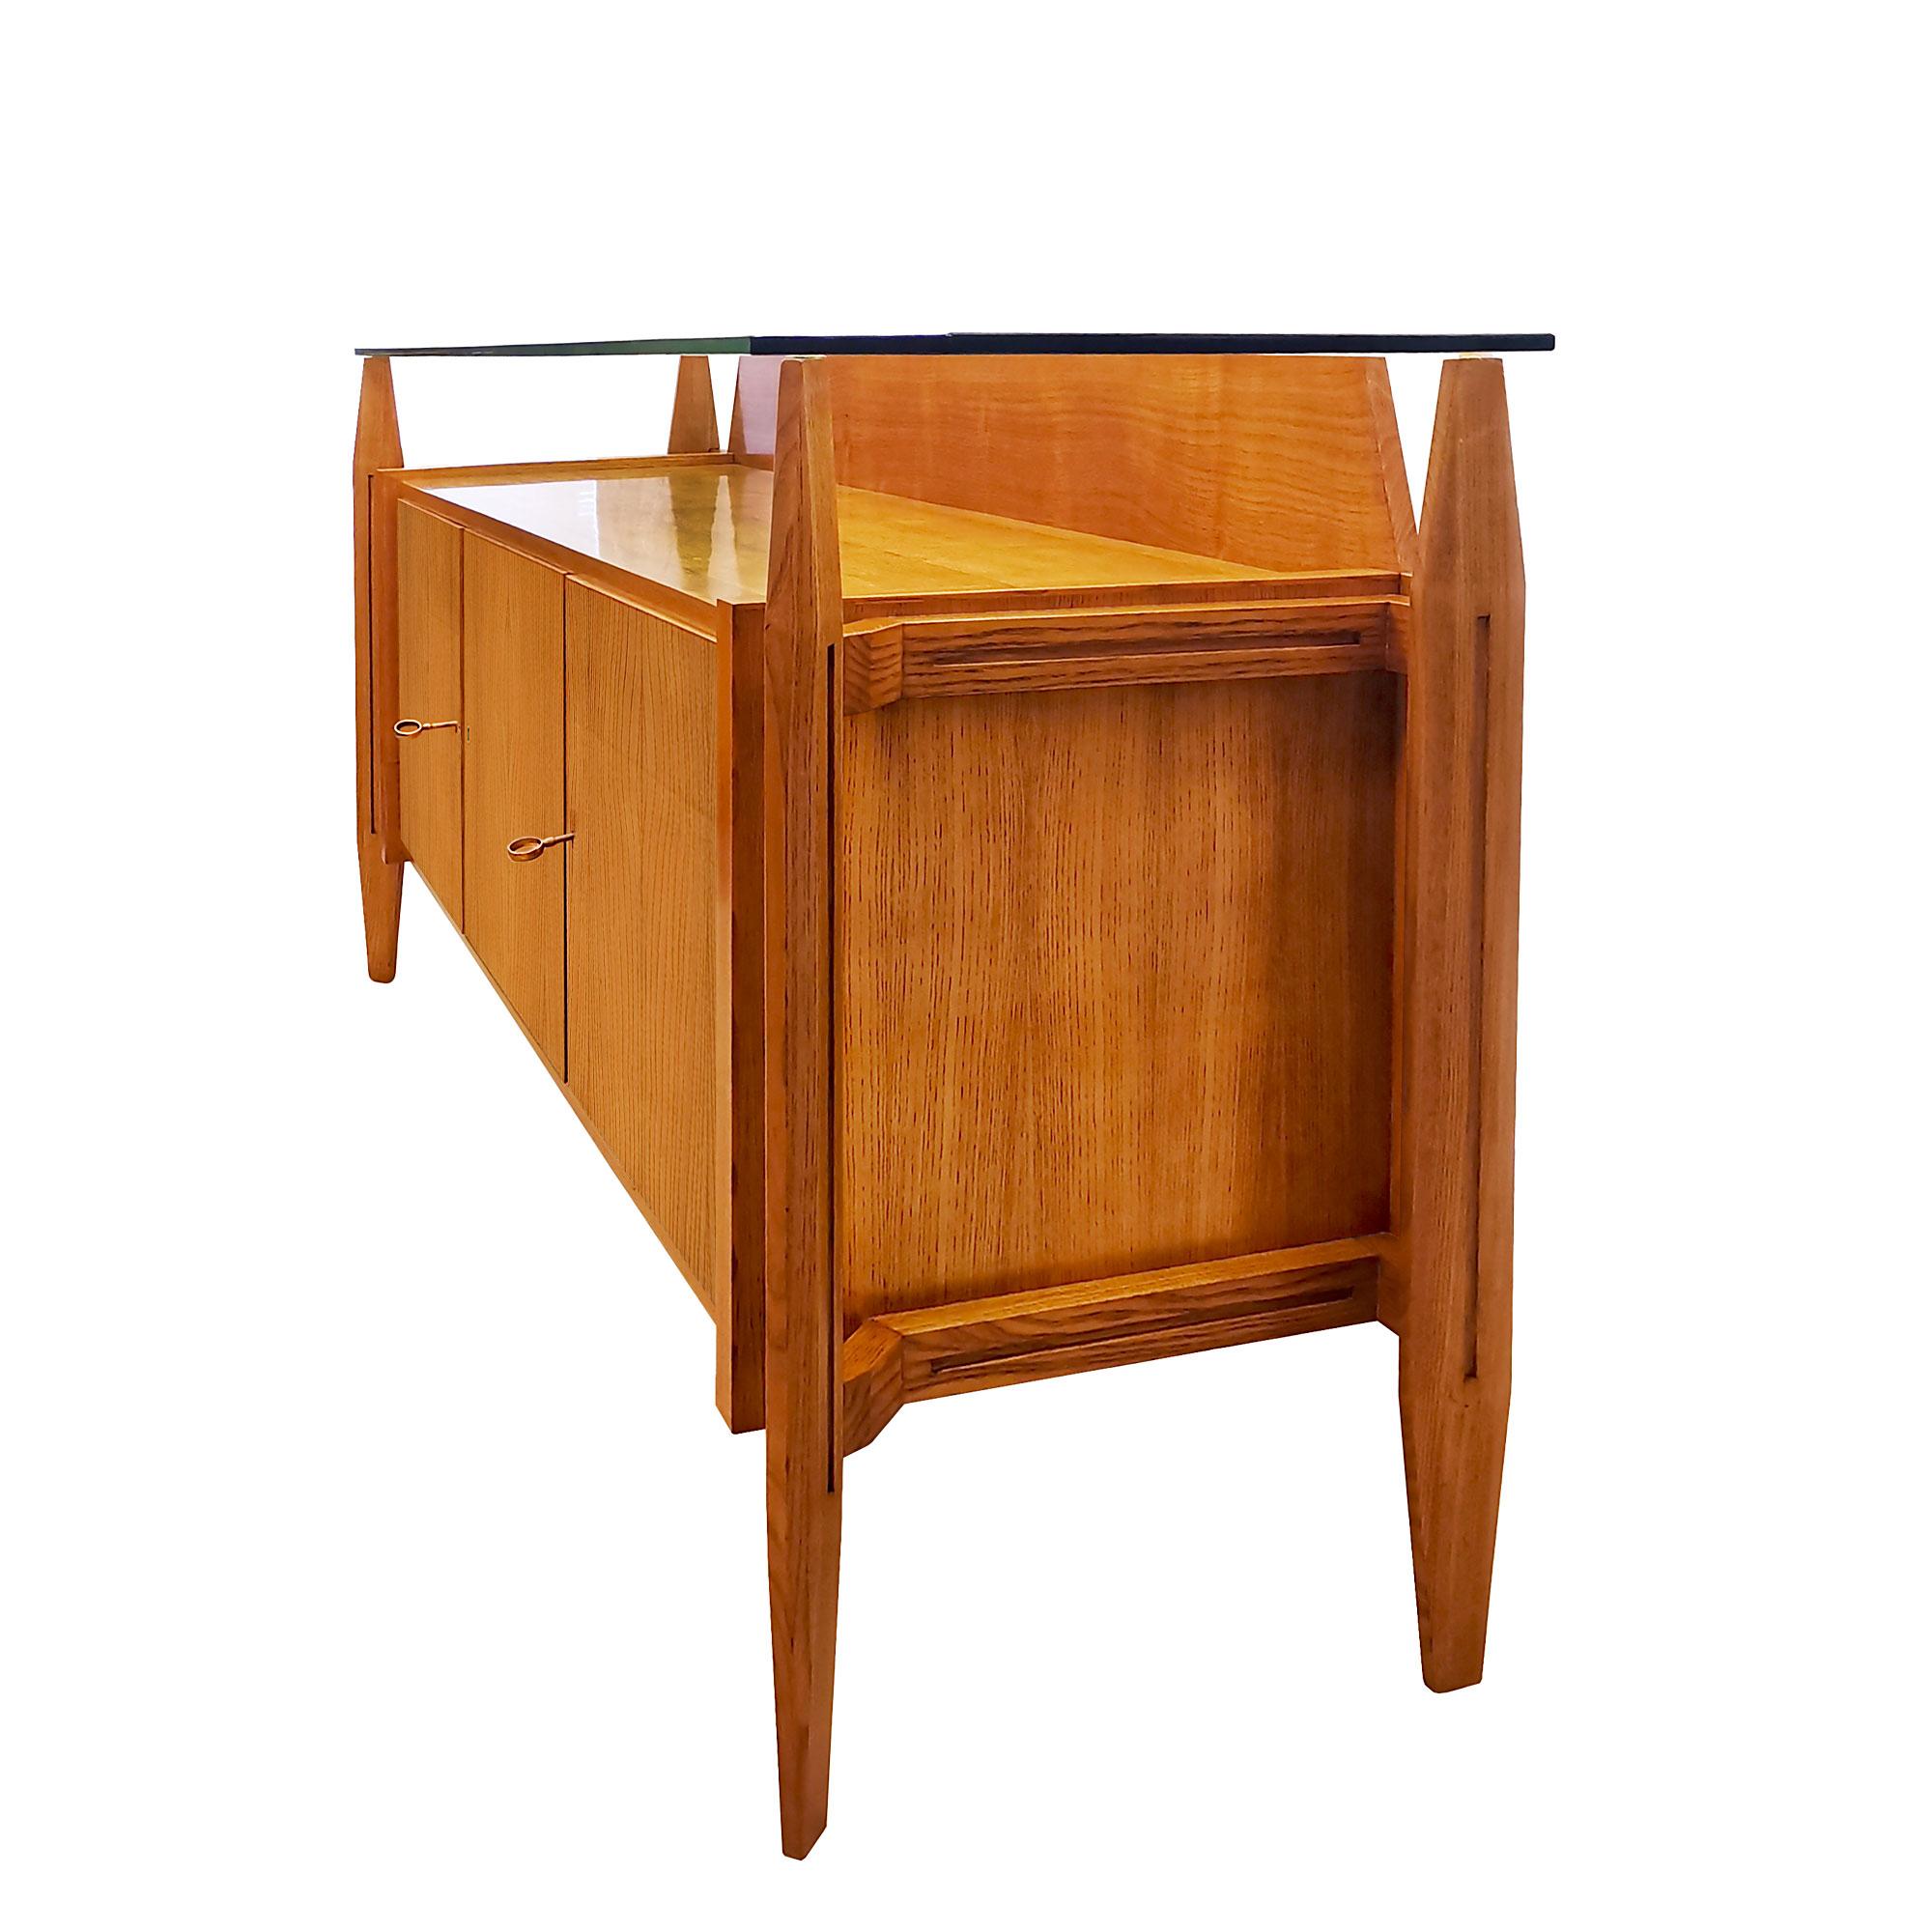 Italian Mid-Century Modern Three-Door Sideboard in Ash Wood and Glass on Top - Italy For Sale